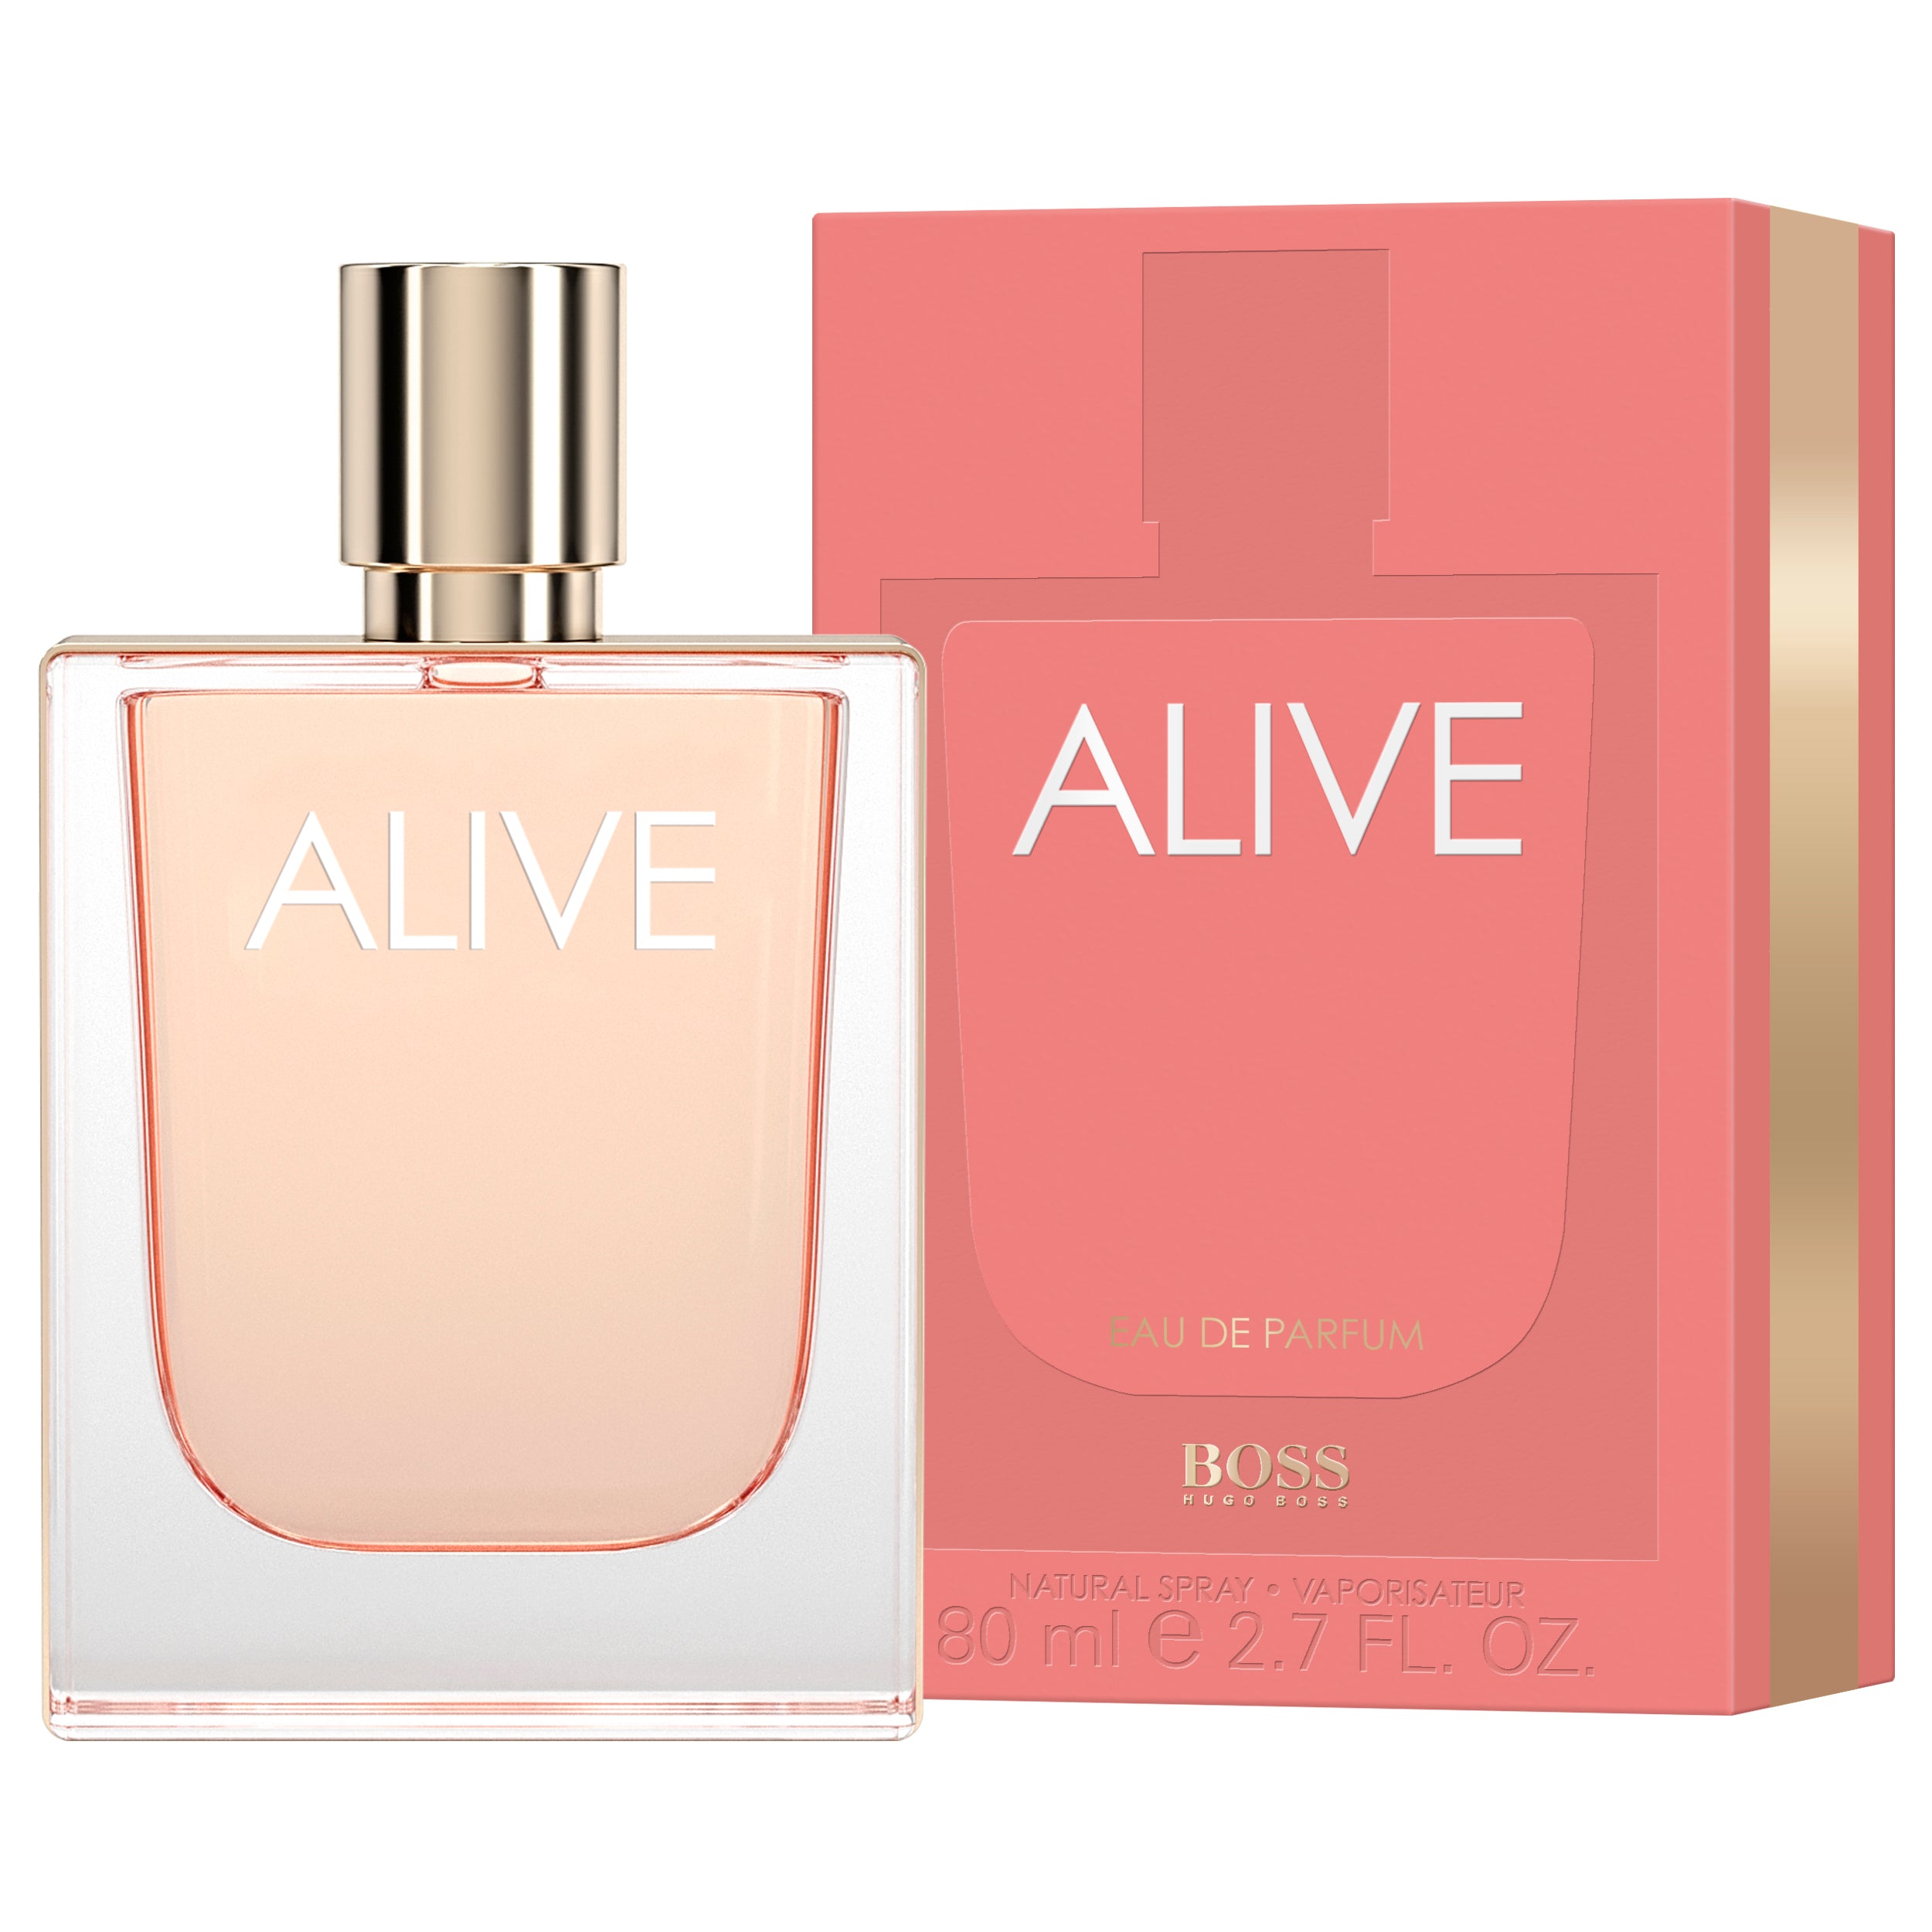 This feminine fragrance exudes confidence and positivity by combining notes of plum, apple, vanilla and jasmine to create a scent that is both contemporary and empowering. Spritz a little on pulse points for an invigorating effect.